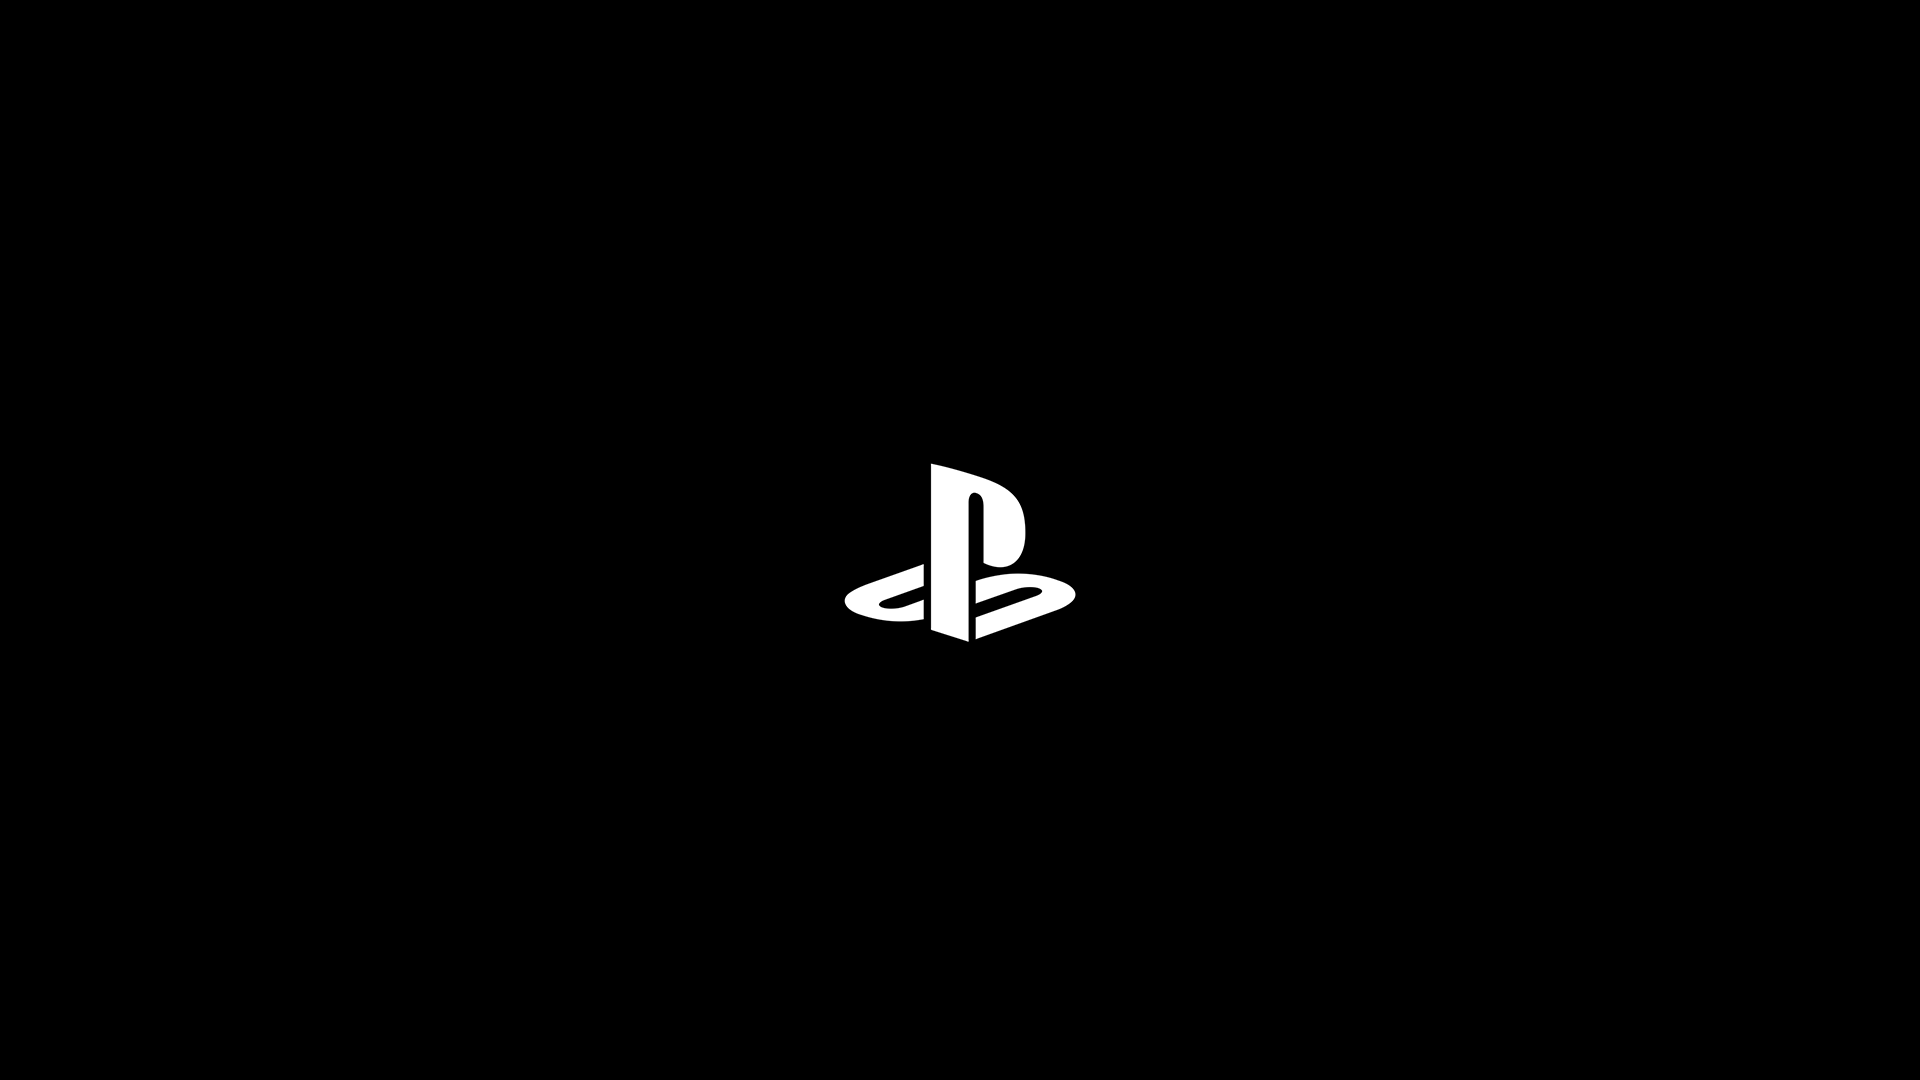 PS4 and PS4 Pro High Resolution Wallpapers 1080p/4K